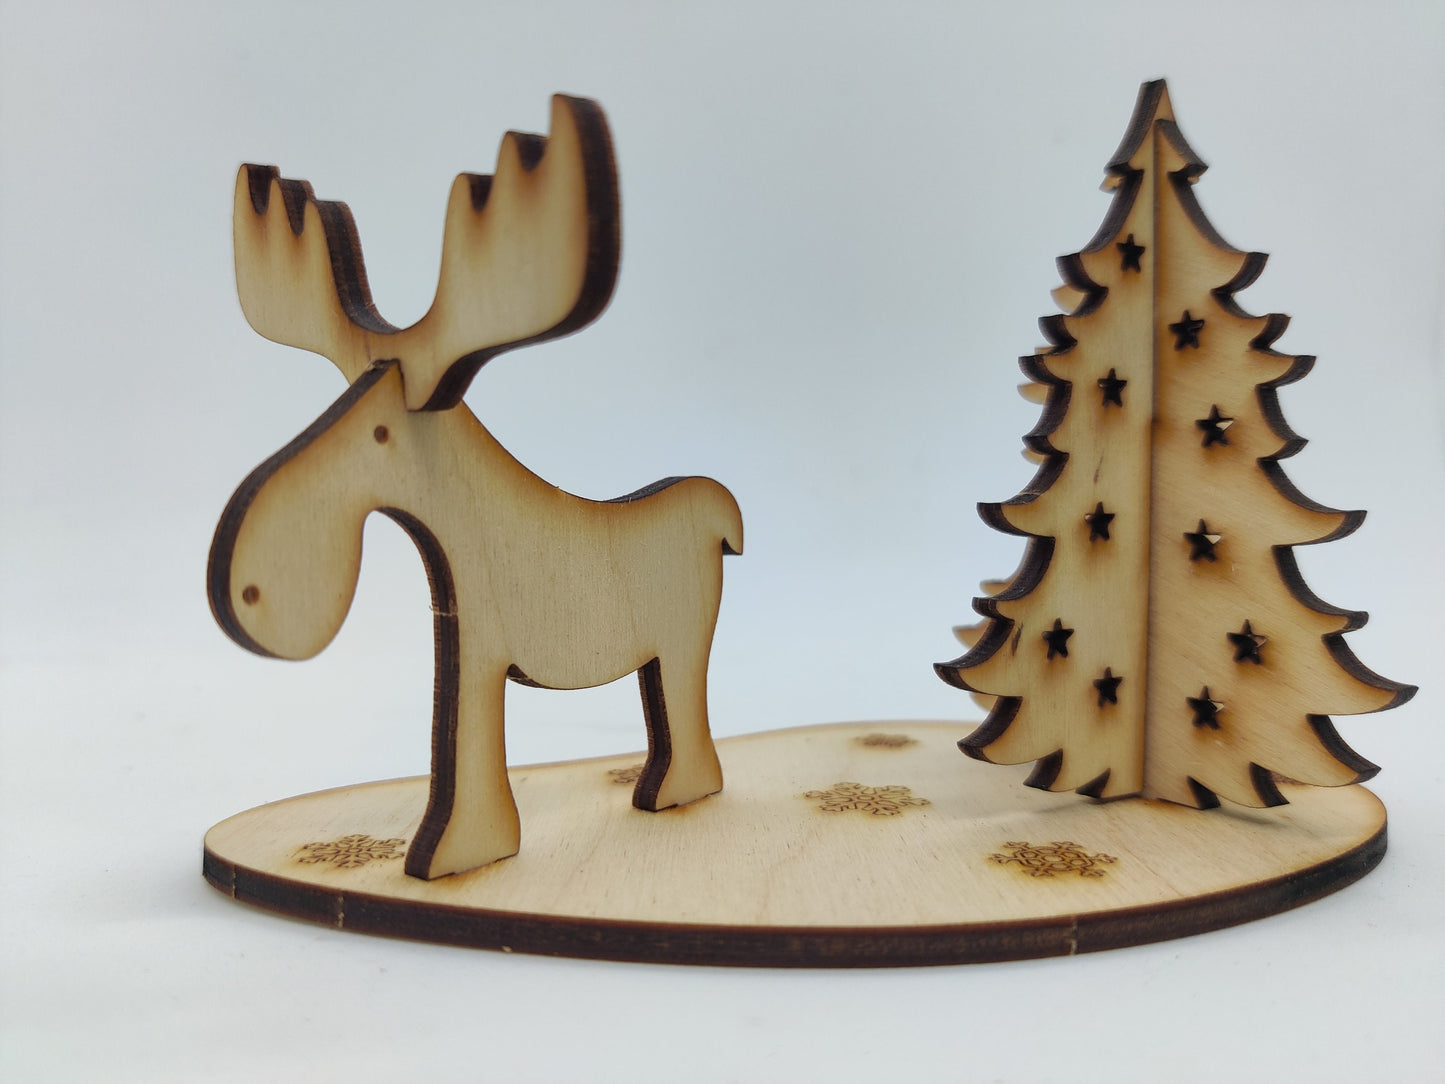 Moose Christmas Card Model made from Wood